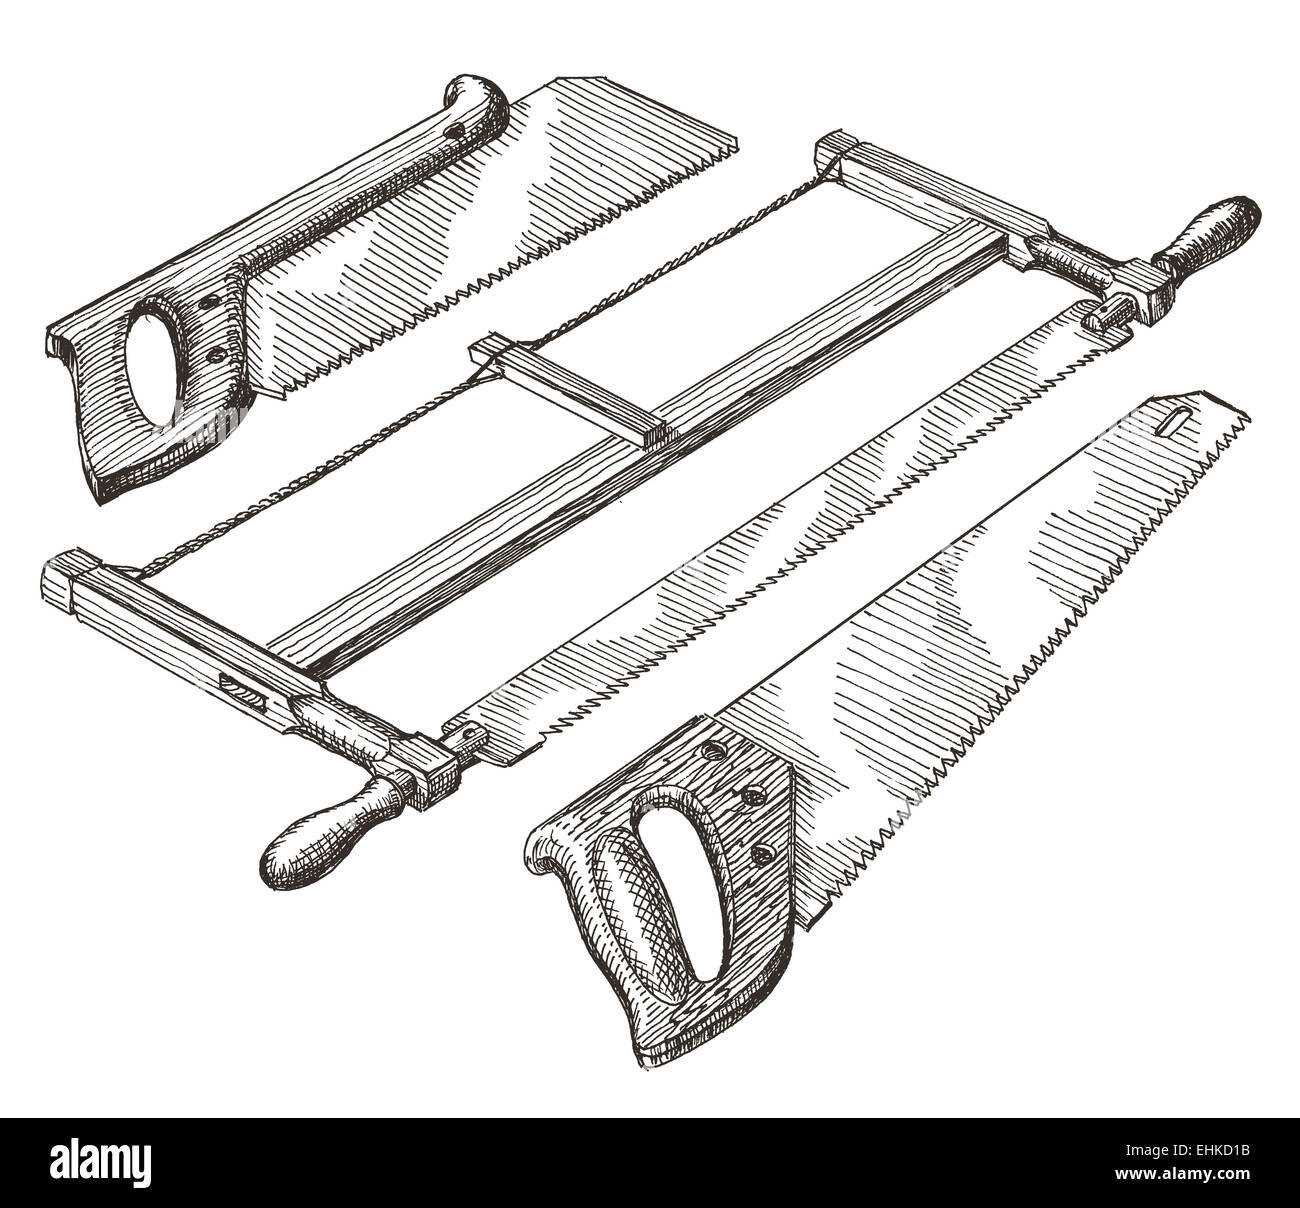 tools, saw, hacksaw on a white background. joinery. sketch Stock Photo